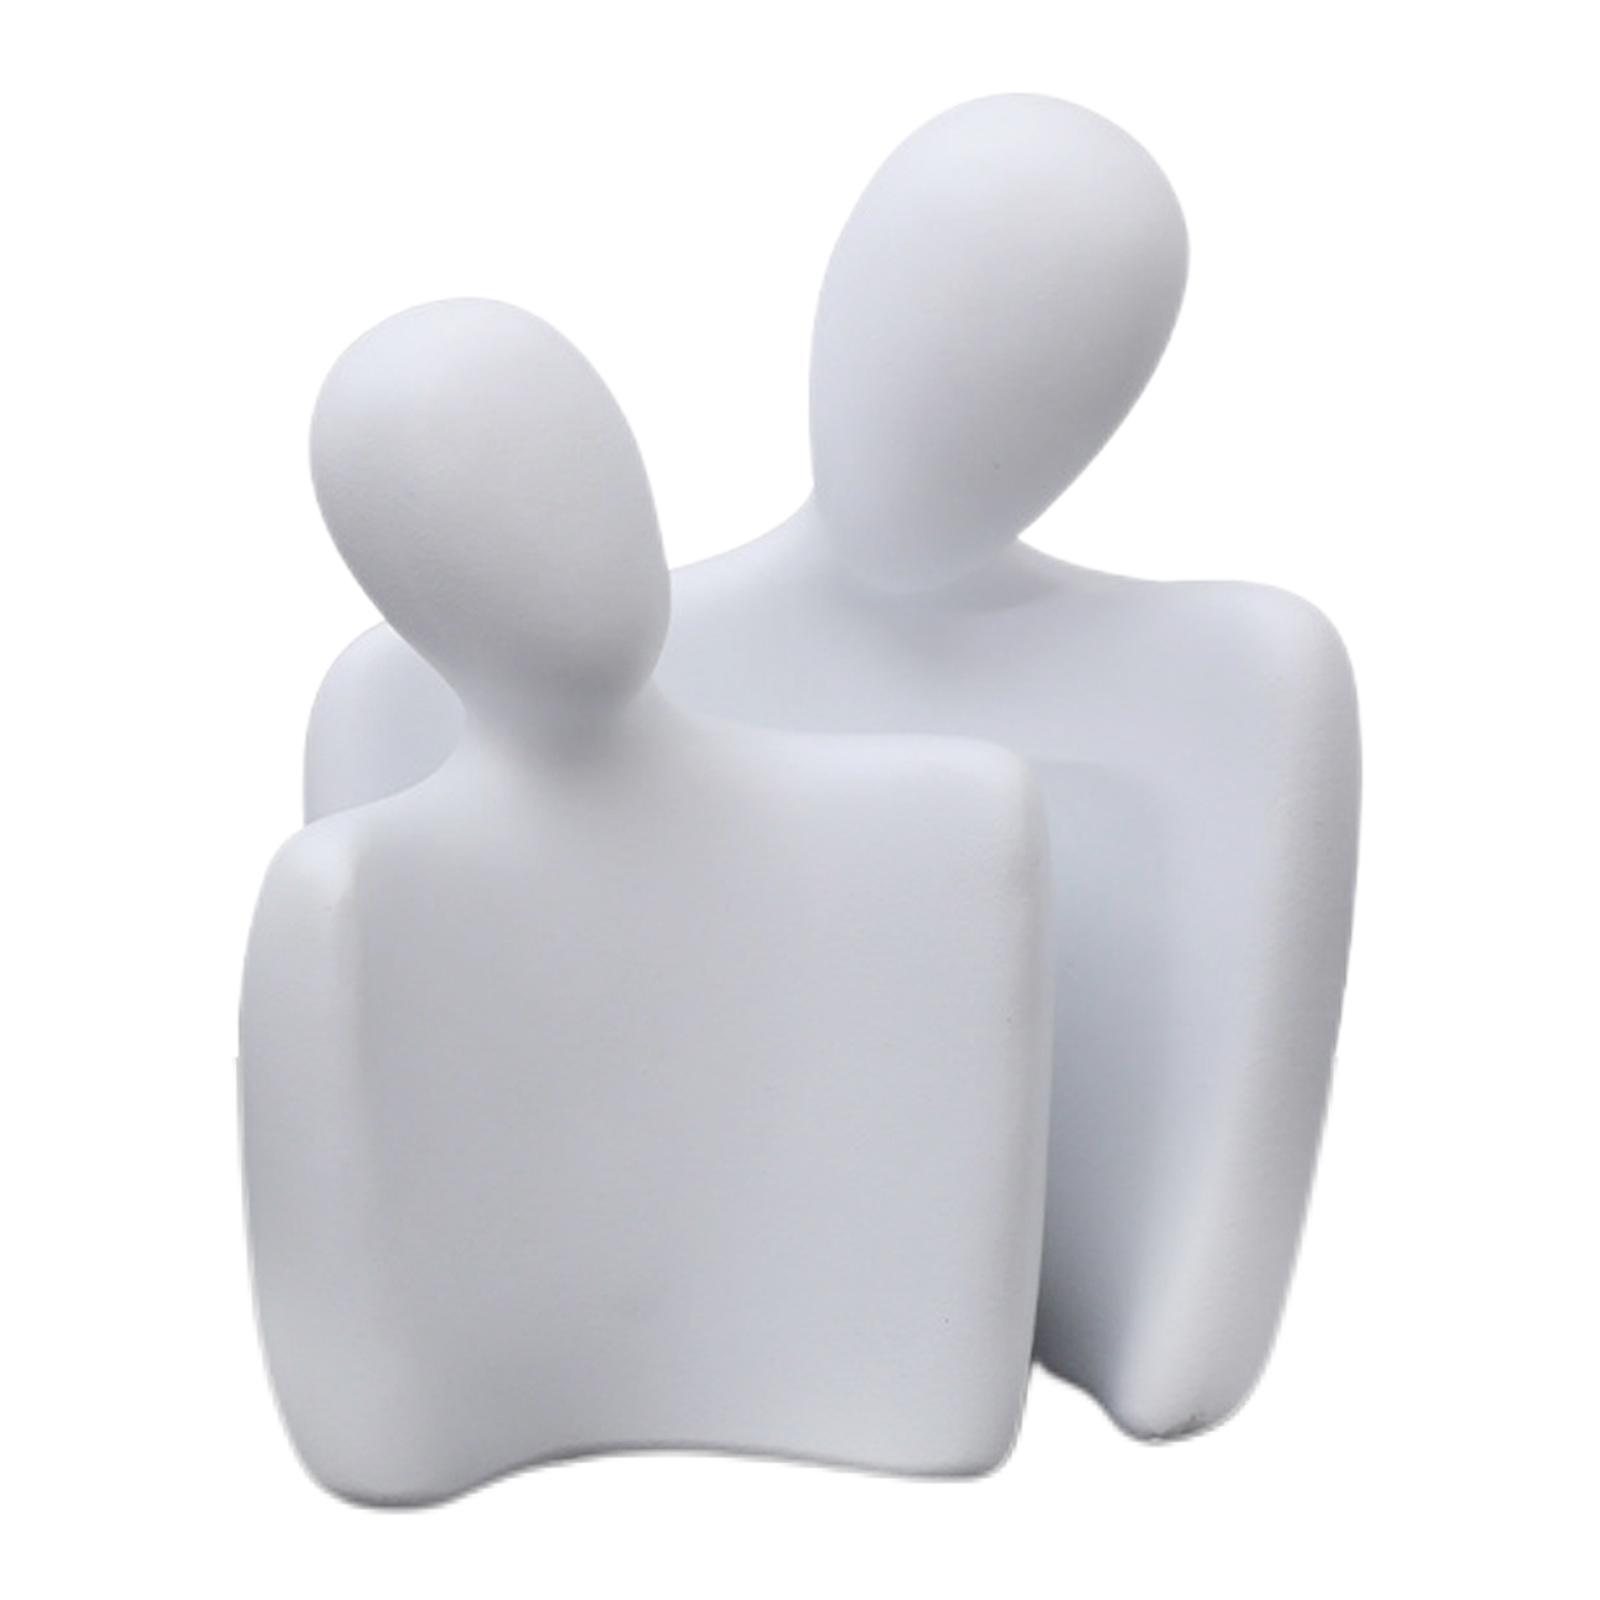 Modern Couple Statues Lover Figurine for Wedding Gifts Home Decor